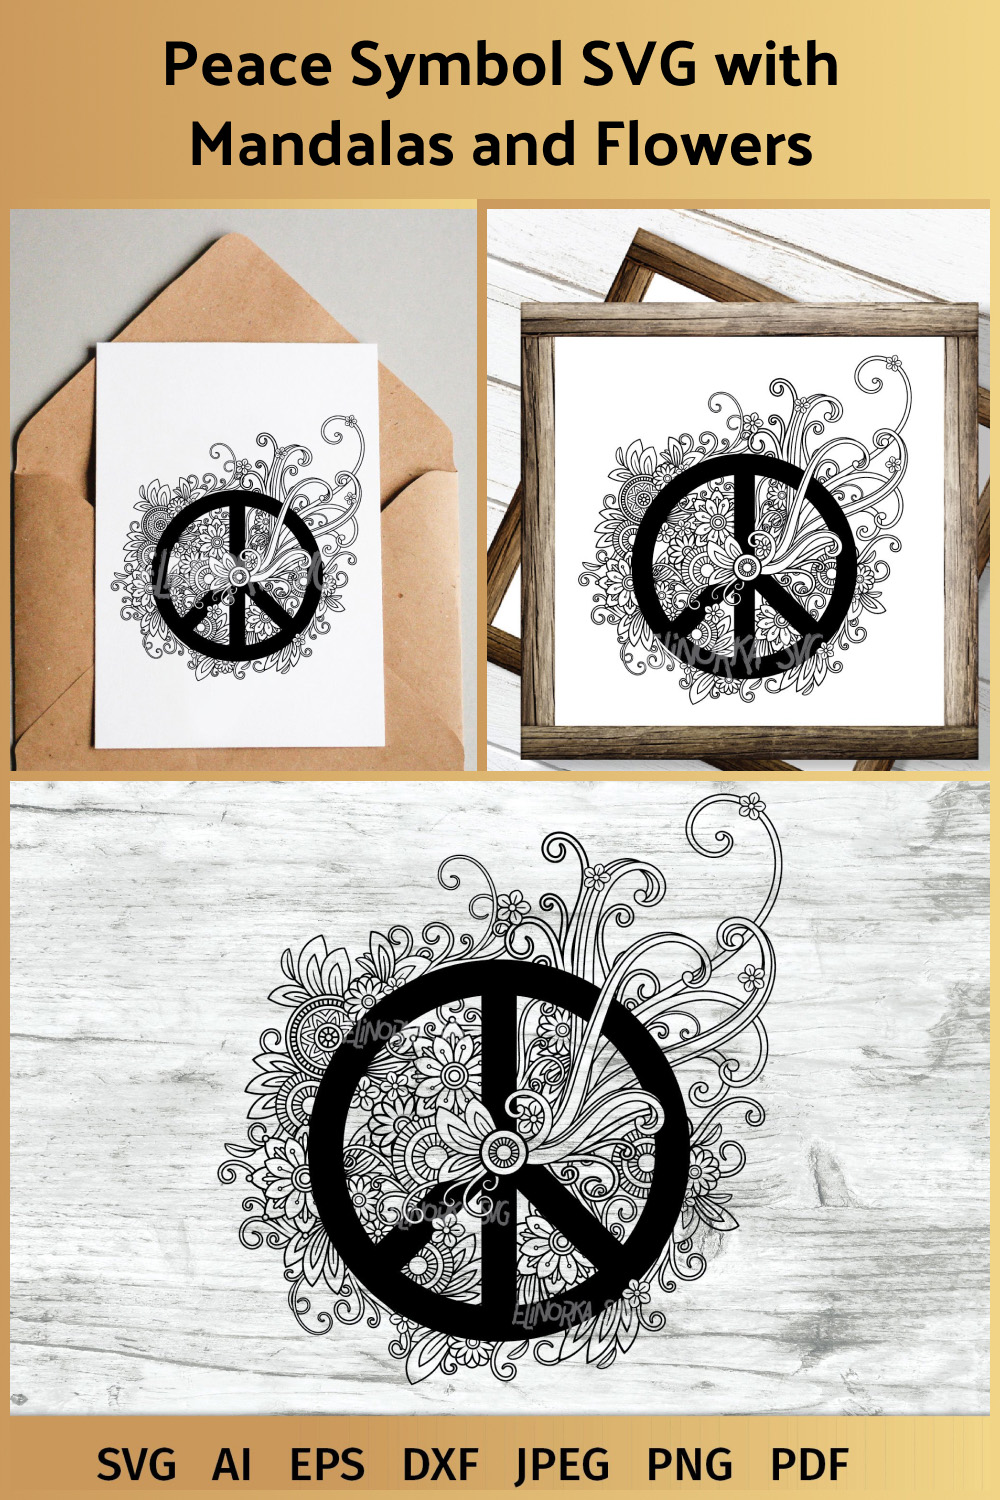 peace symbol svg with mandalas and flowers 01 1000x1500